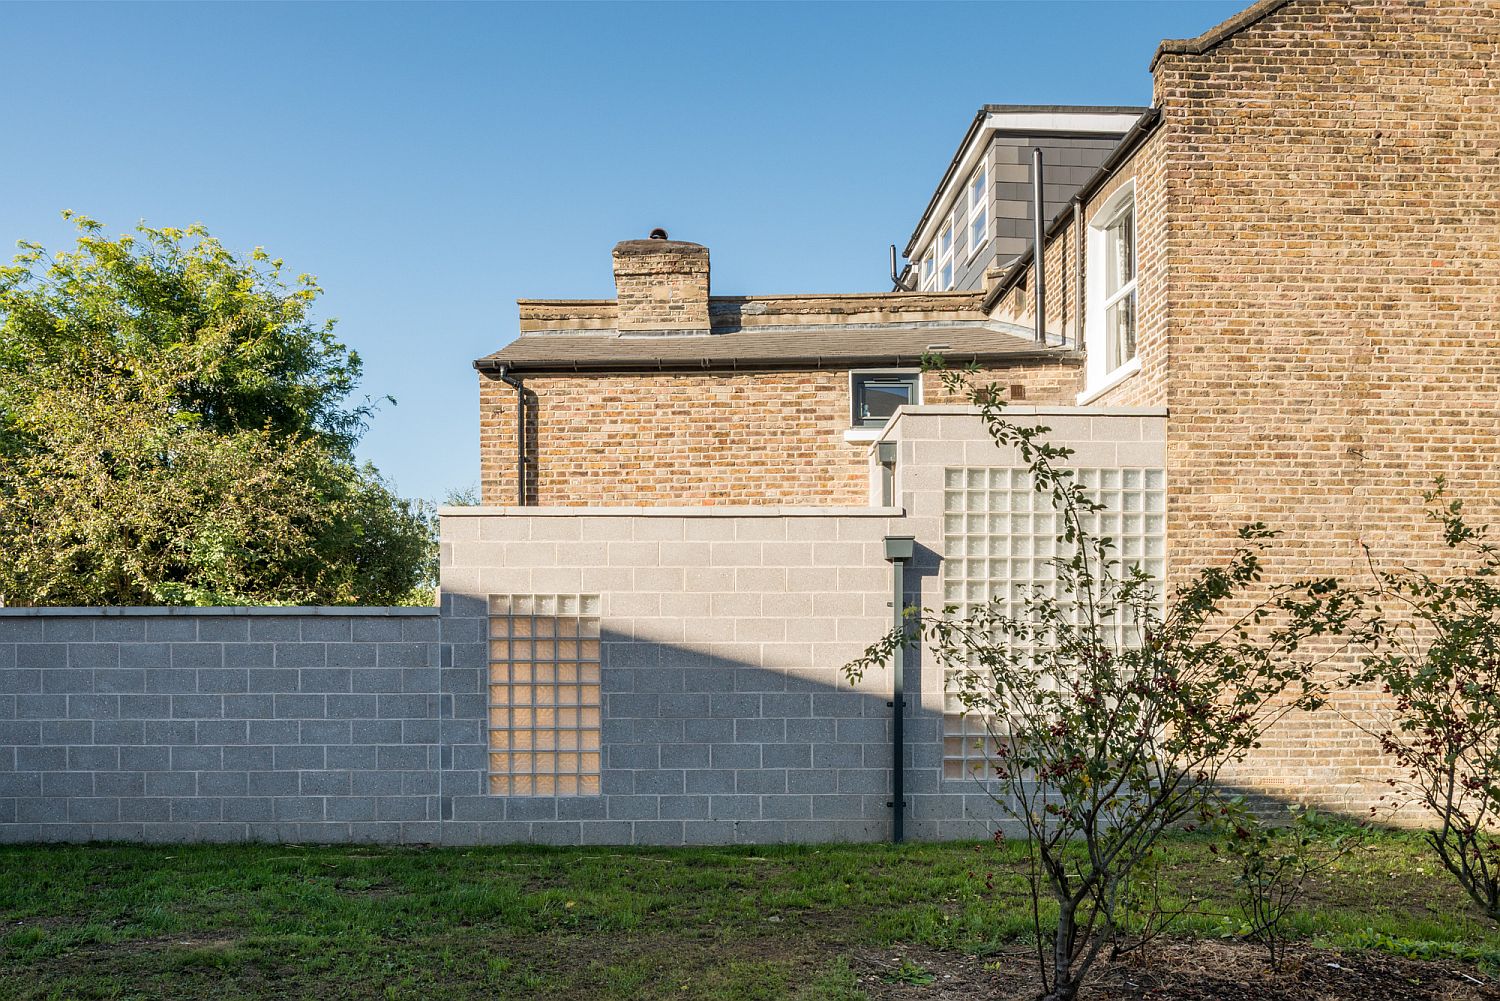 Modern-cement-block-extension-to-Victorian-terrace-home-in-north-east-London